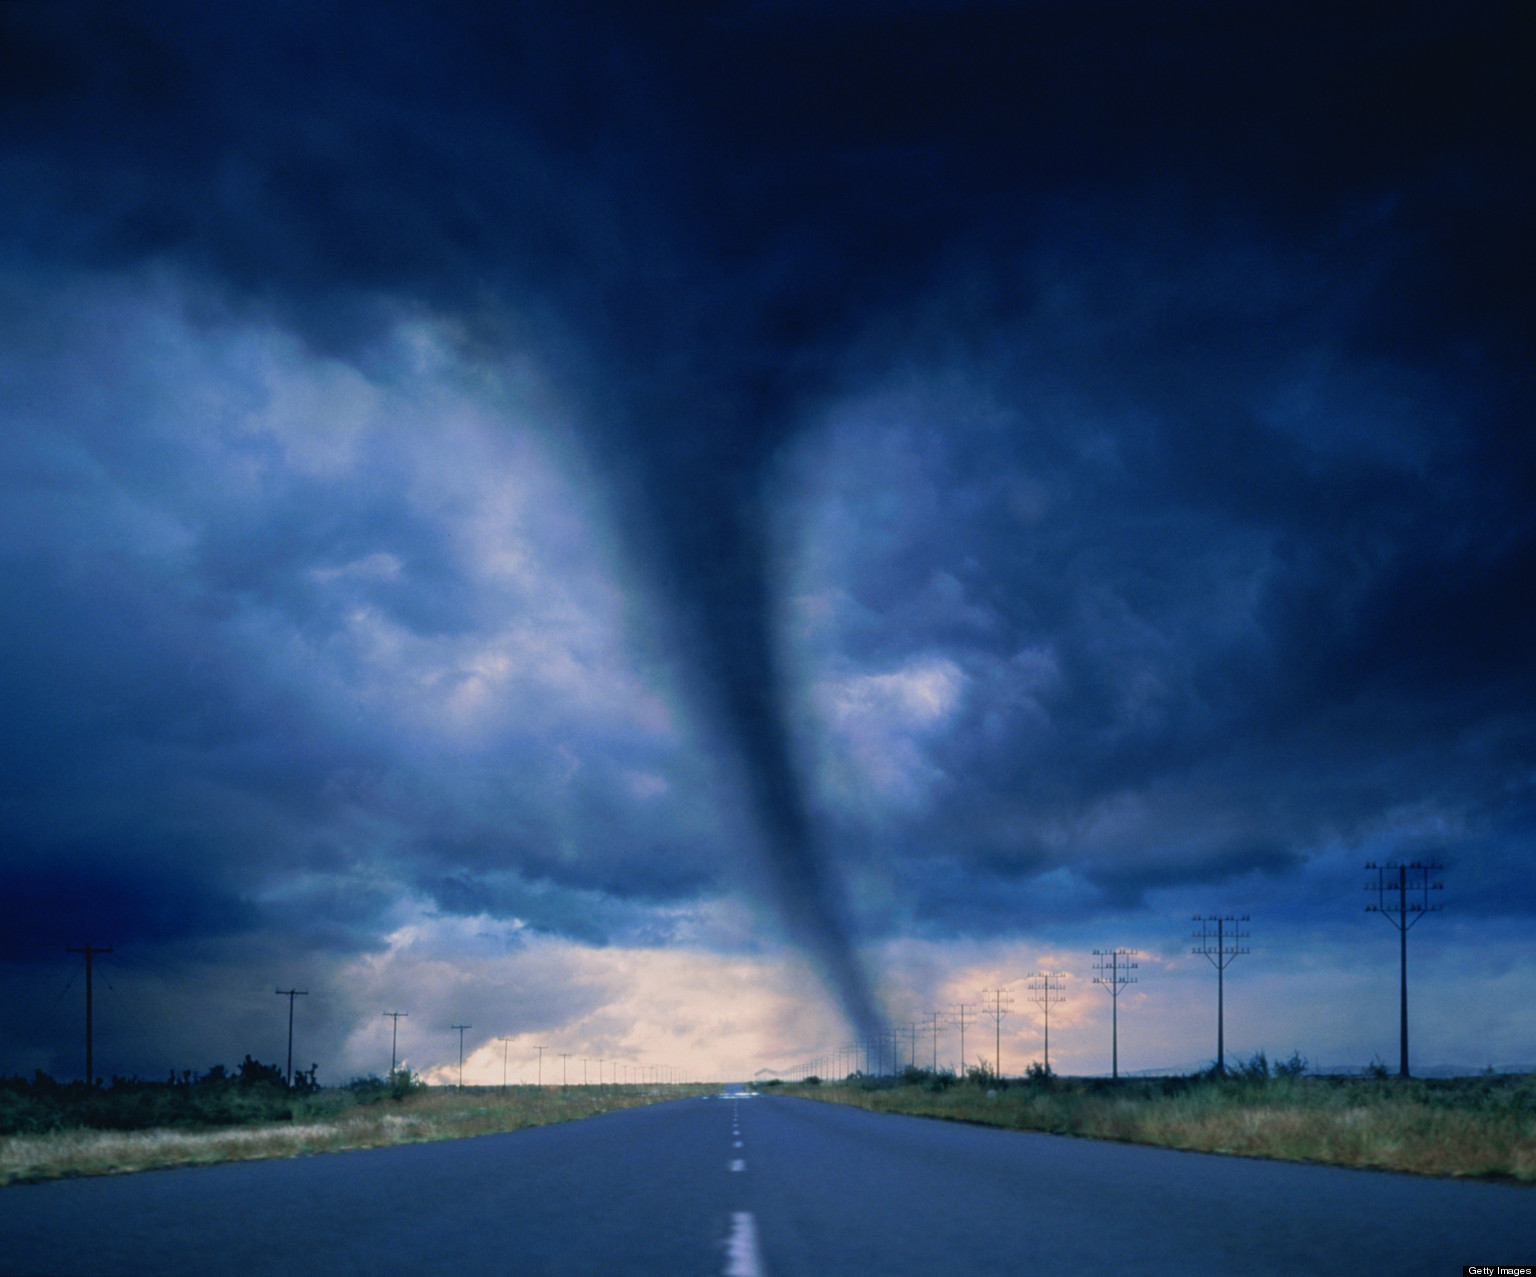 What Can Be Done About Tornadoes - The Killer in the Air? | HuffPost UK